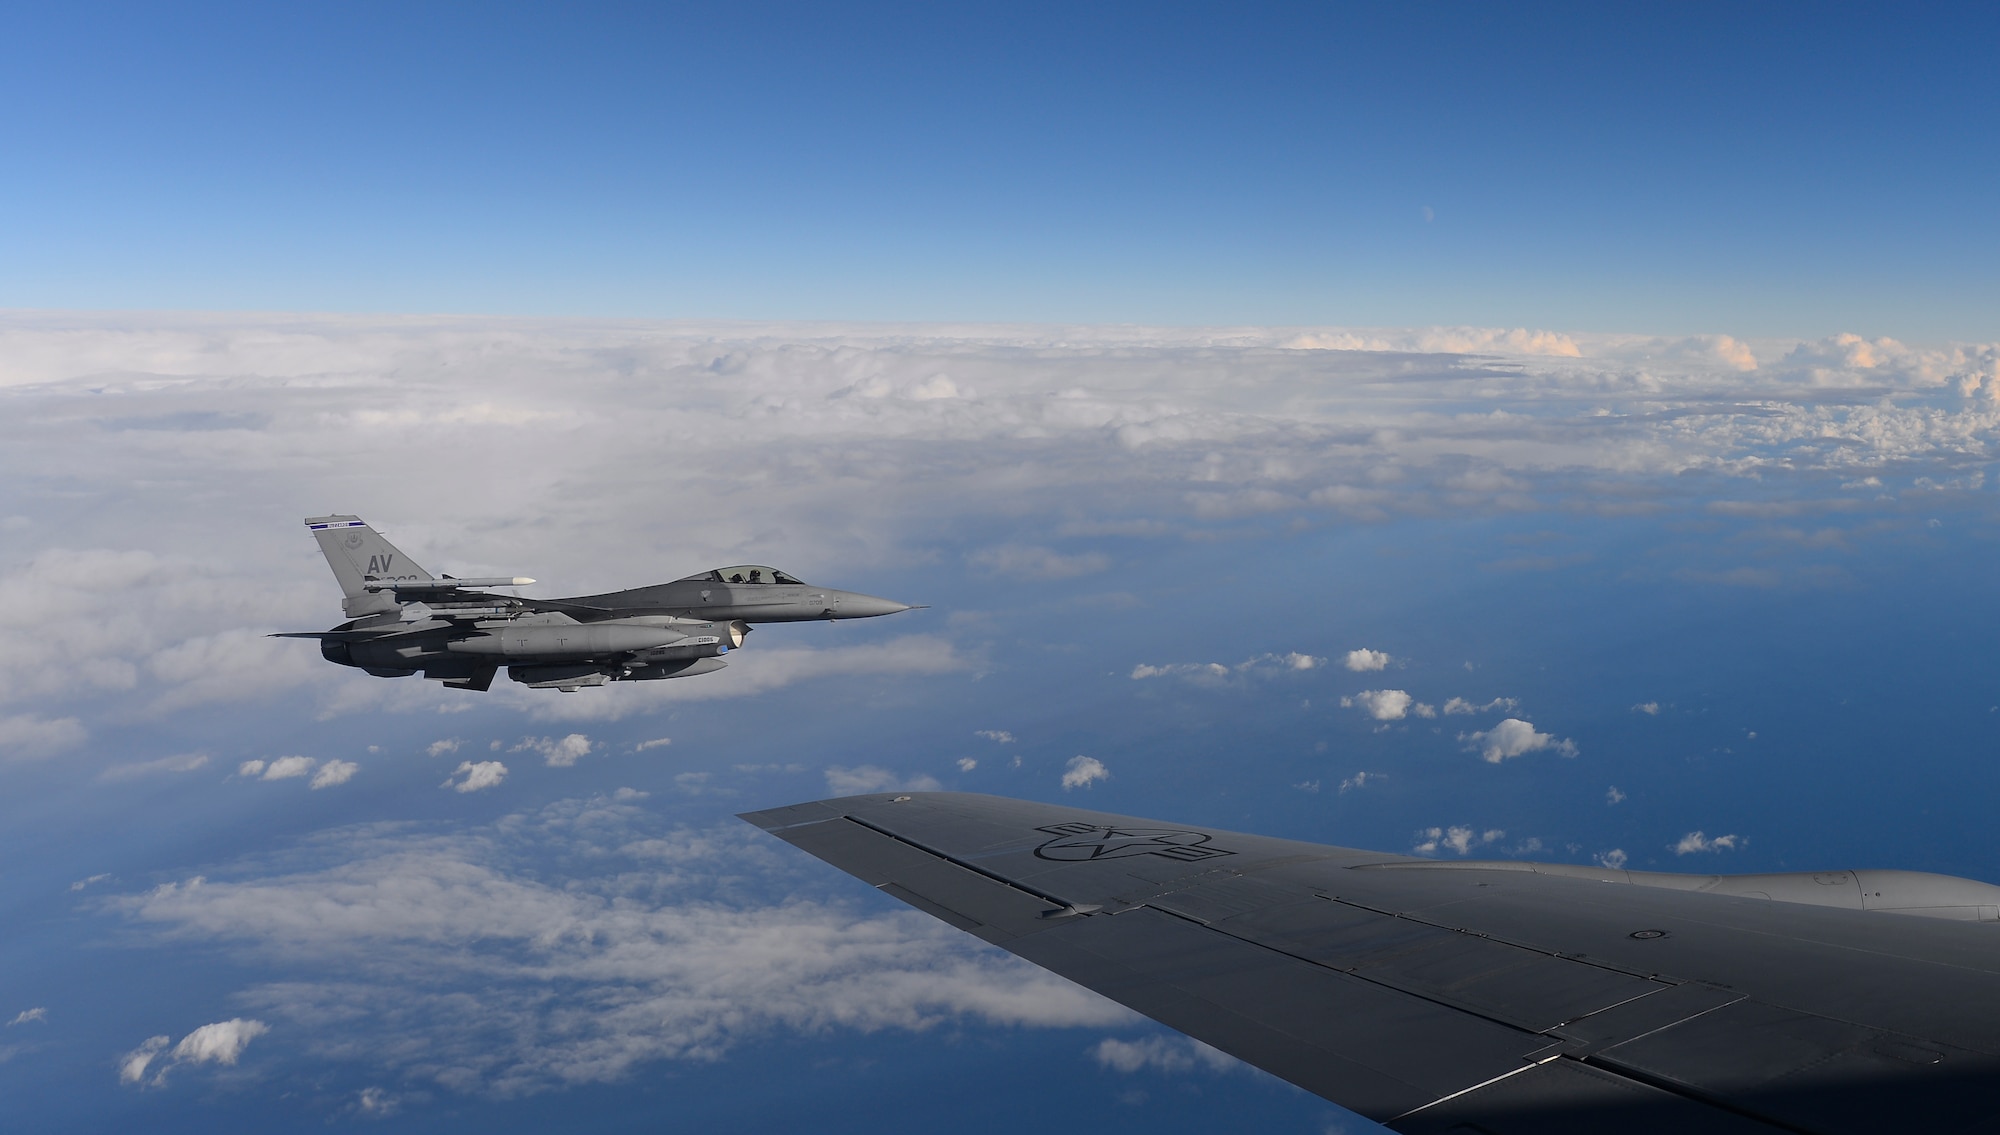 A U.S. Air Force F-16 Fighting Falcon assigned to the 31st Fighter Wing, Aviano Air Base, Italy, flies off the wing of a KC-135 Stratotanker assigned to the 100th Air Refueling Wing, RAF Mildenhall, England, over the Mediterranean Sea during Exercise Tonnerre Lighting Nov. 9, 2016. Exercise Tonnerre Lightning is a NATO exercise designed to improve interoperability between partner nation air forces. (U.S. Air Force photo by Staff Sgt. Micaiah Anthony)